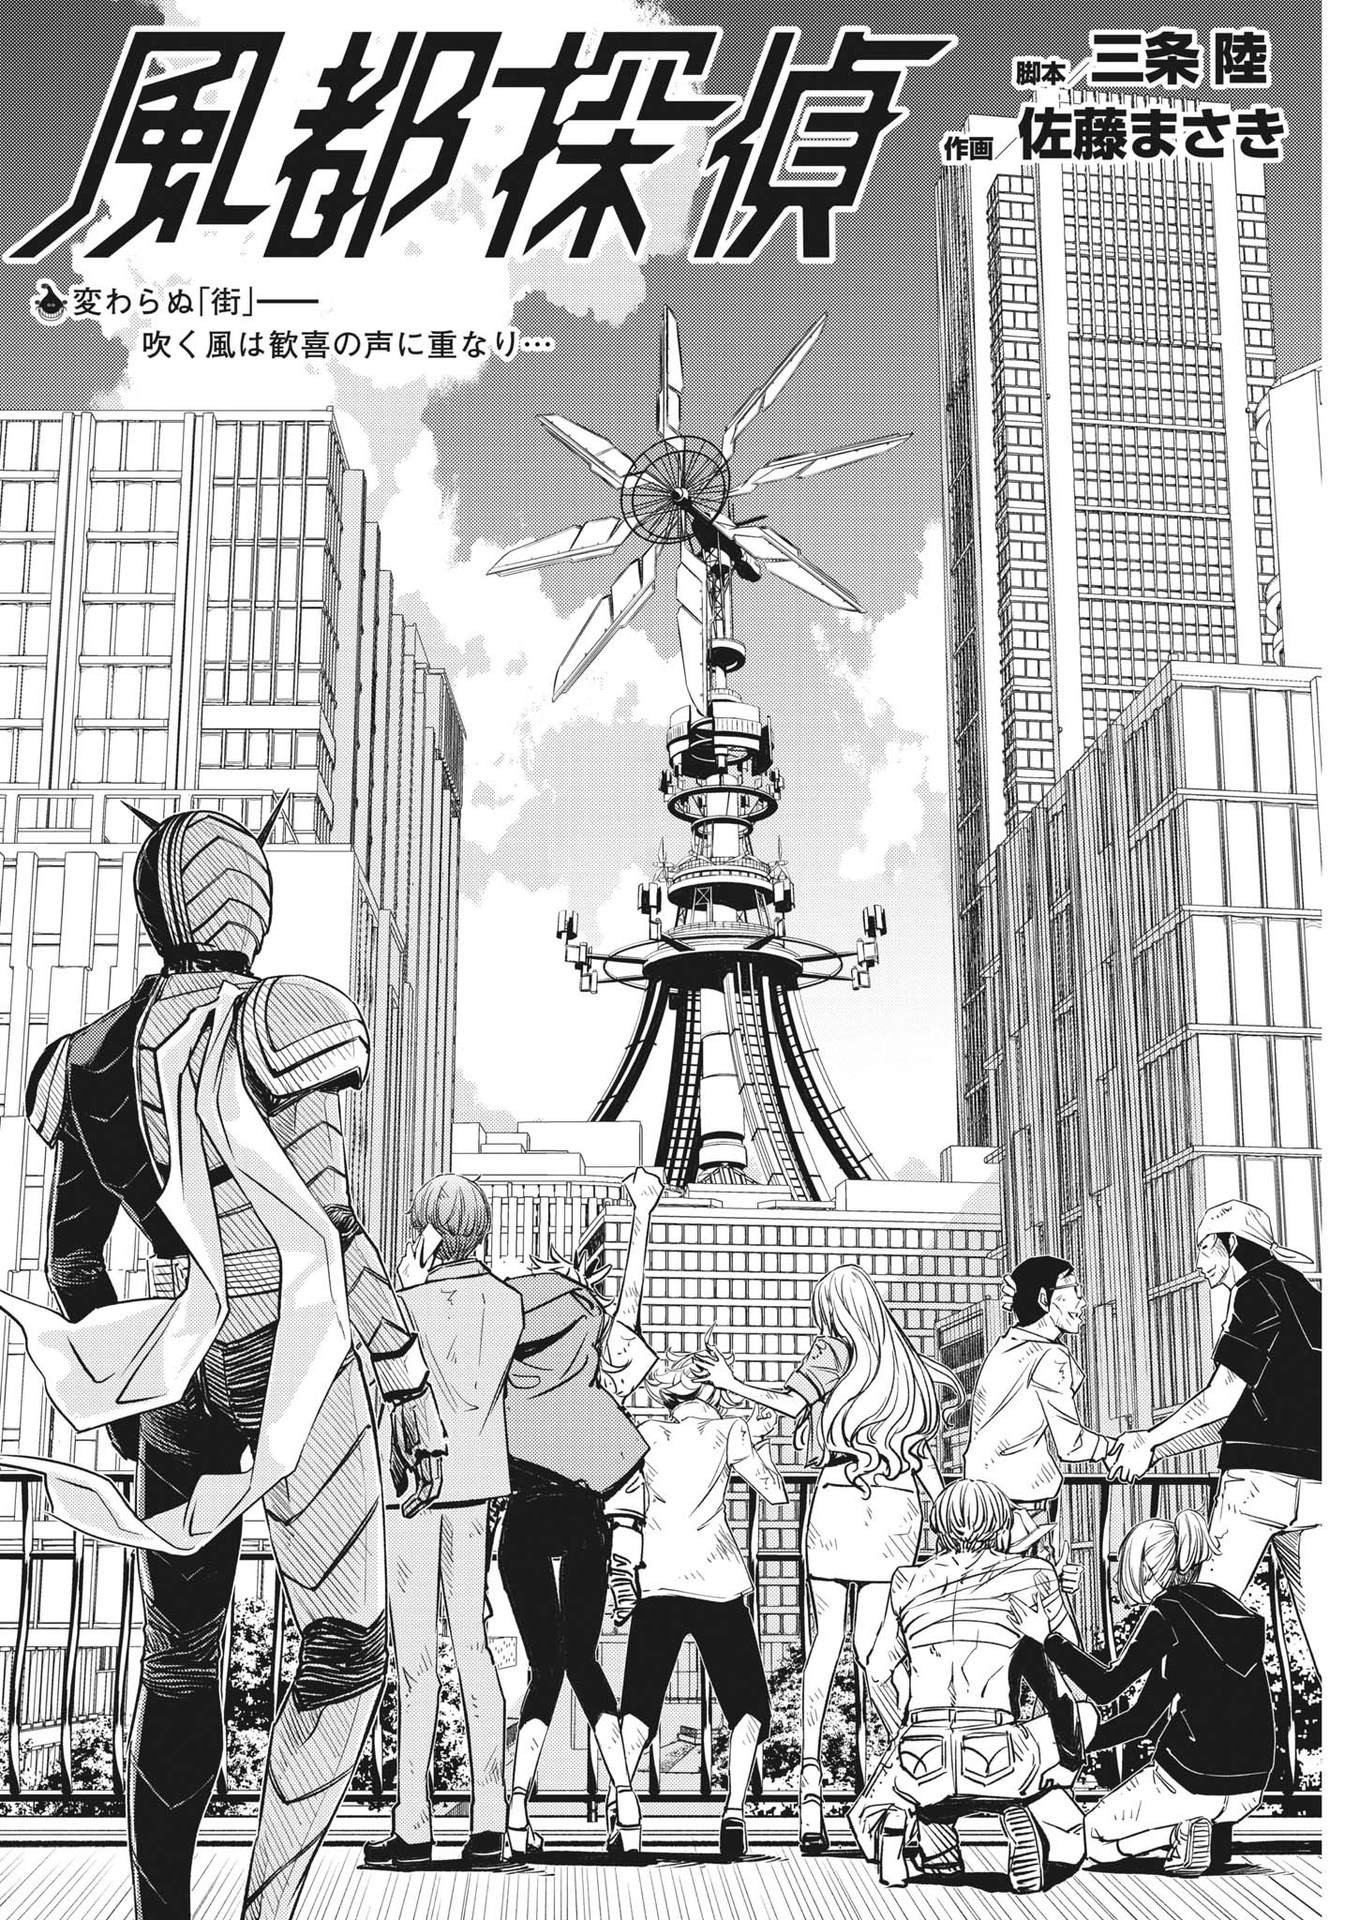 Kamen Rider W: Fuuto Tantei - Chapter 143 - Page 2